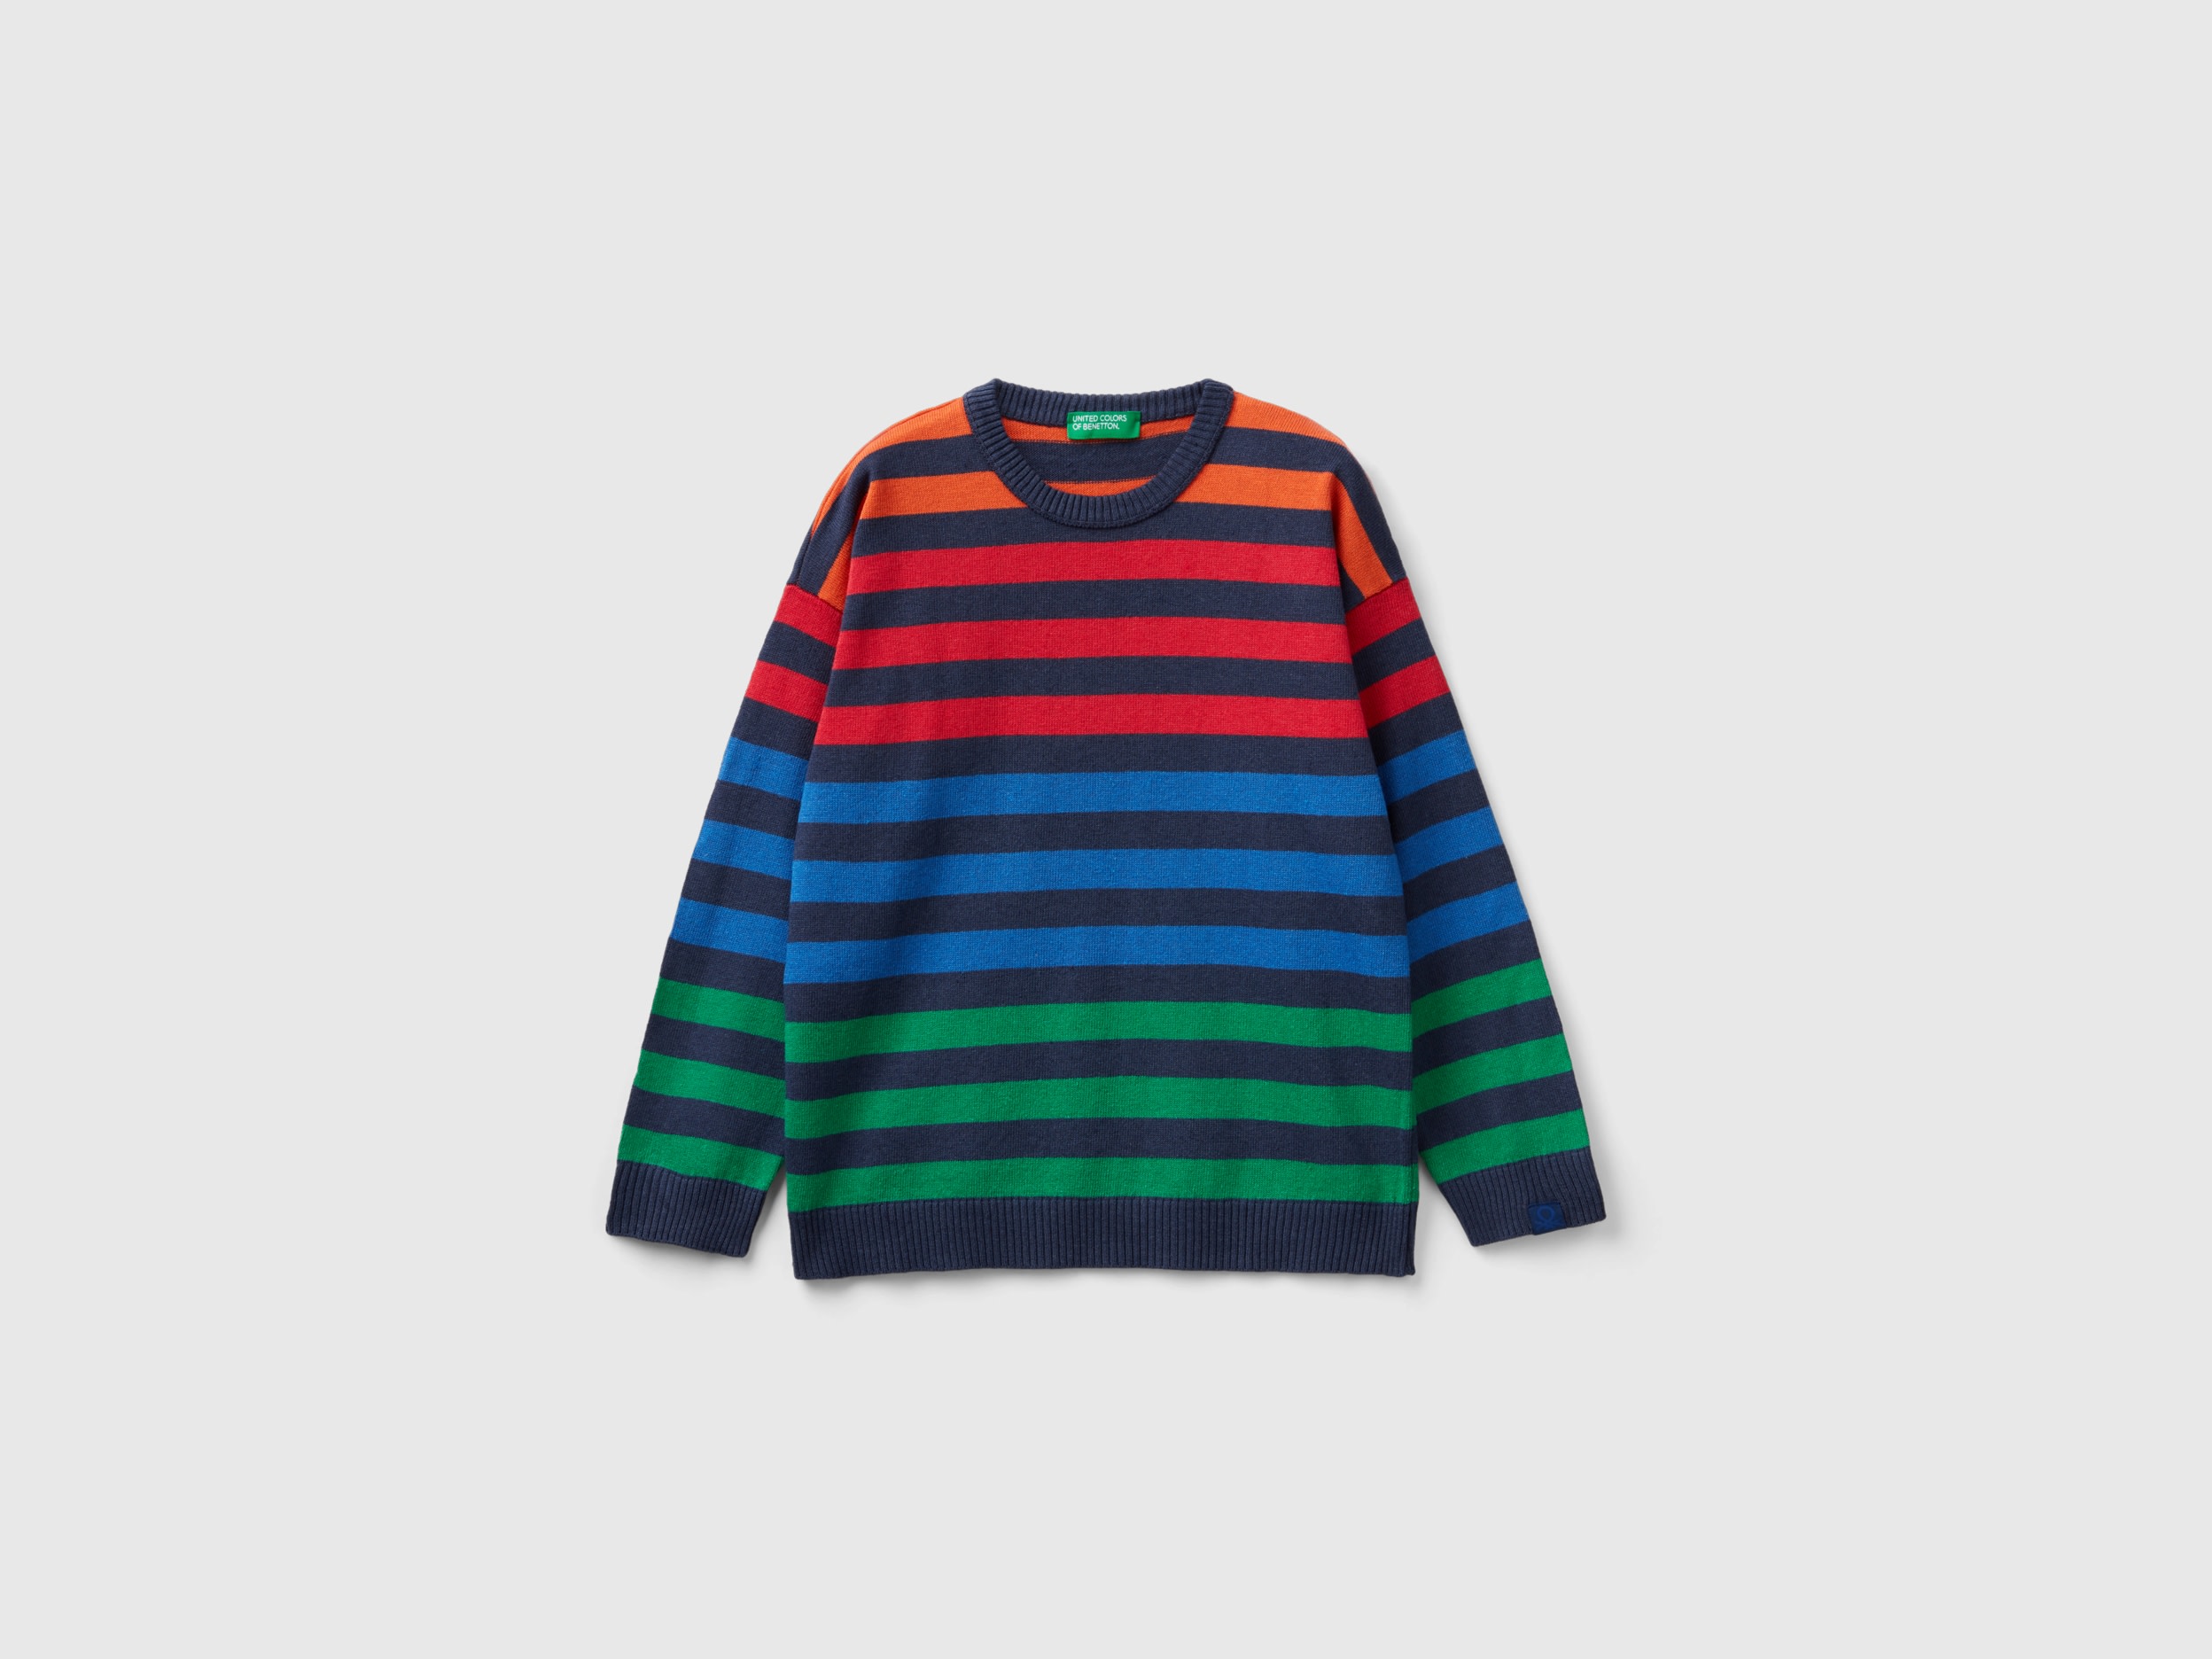 Image of Benetton, Striped Sweater, size 2XL, Multi-color, Kids